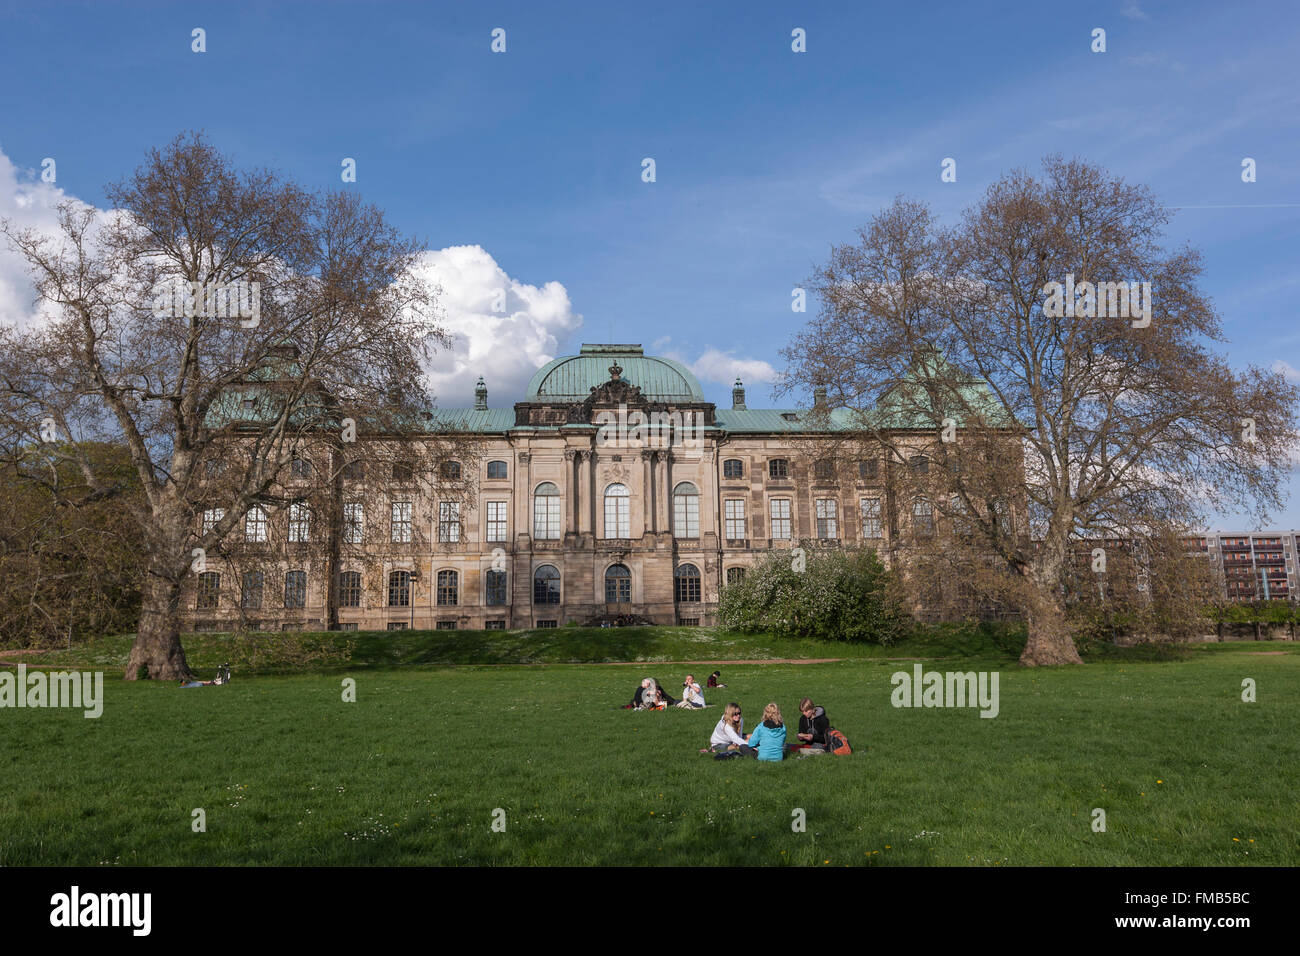 People in the grass in front of Japanisches Palais, Dresden, Saxony, Germany Stock Photo